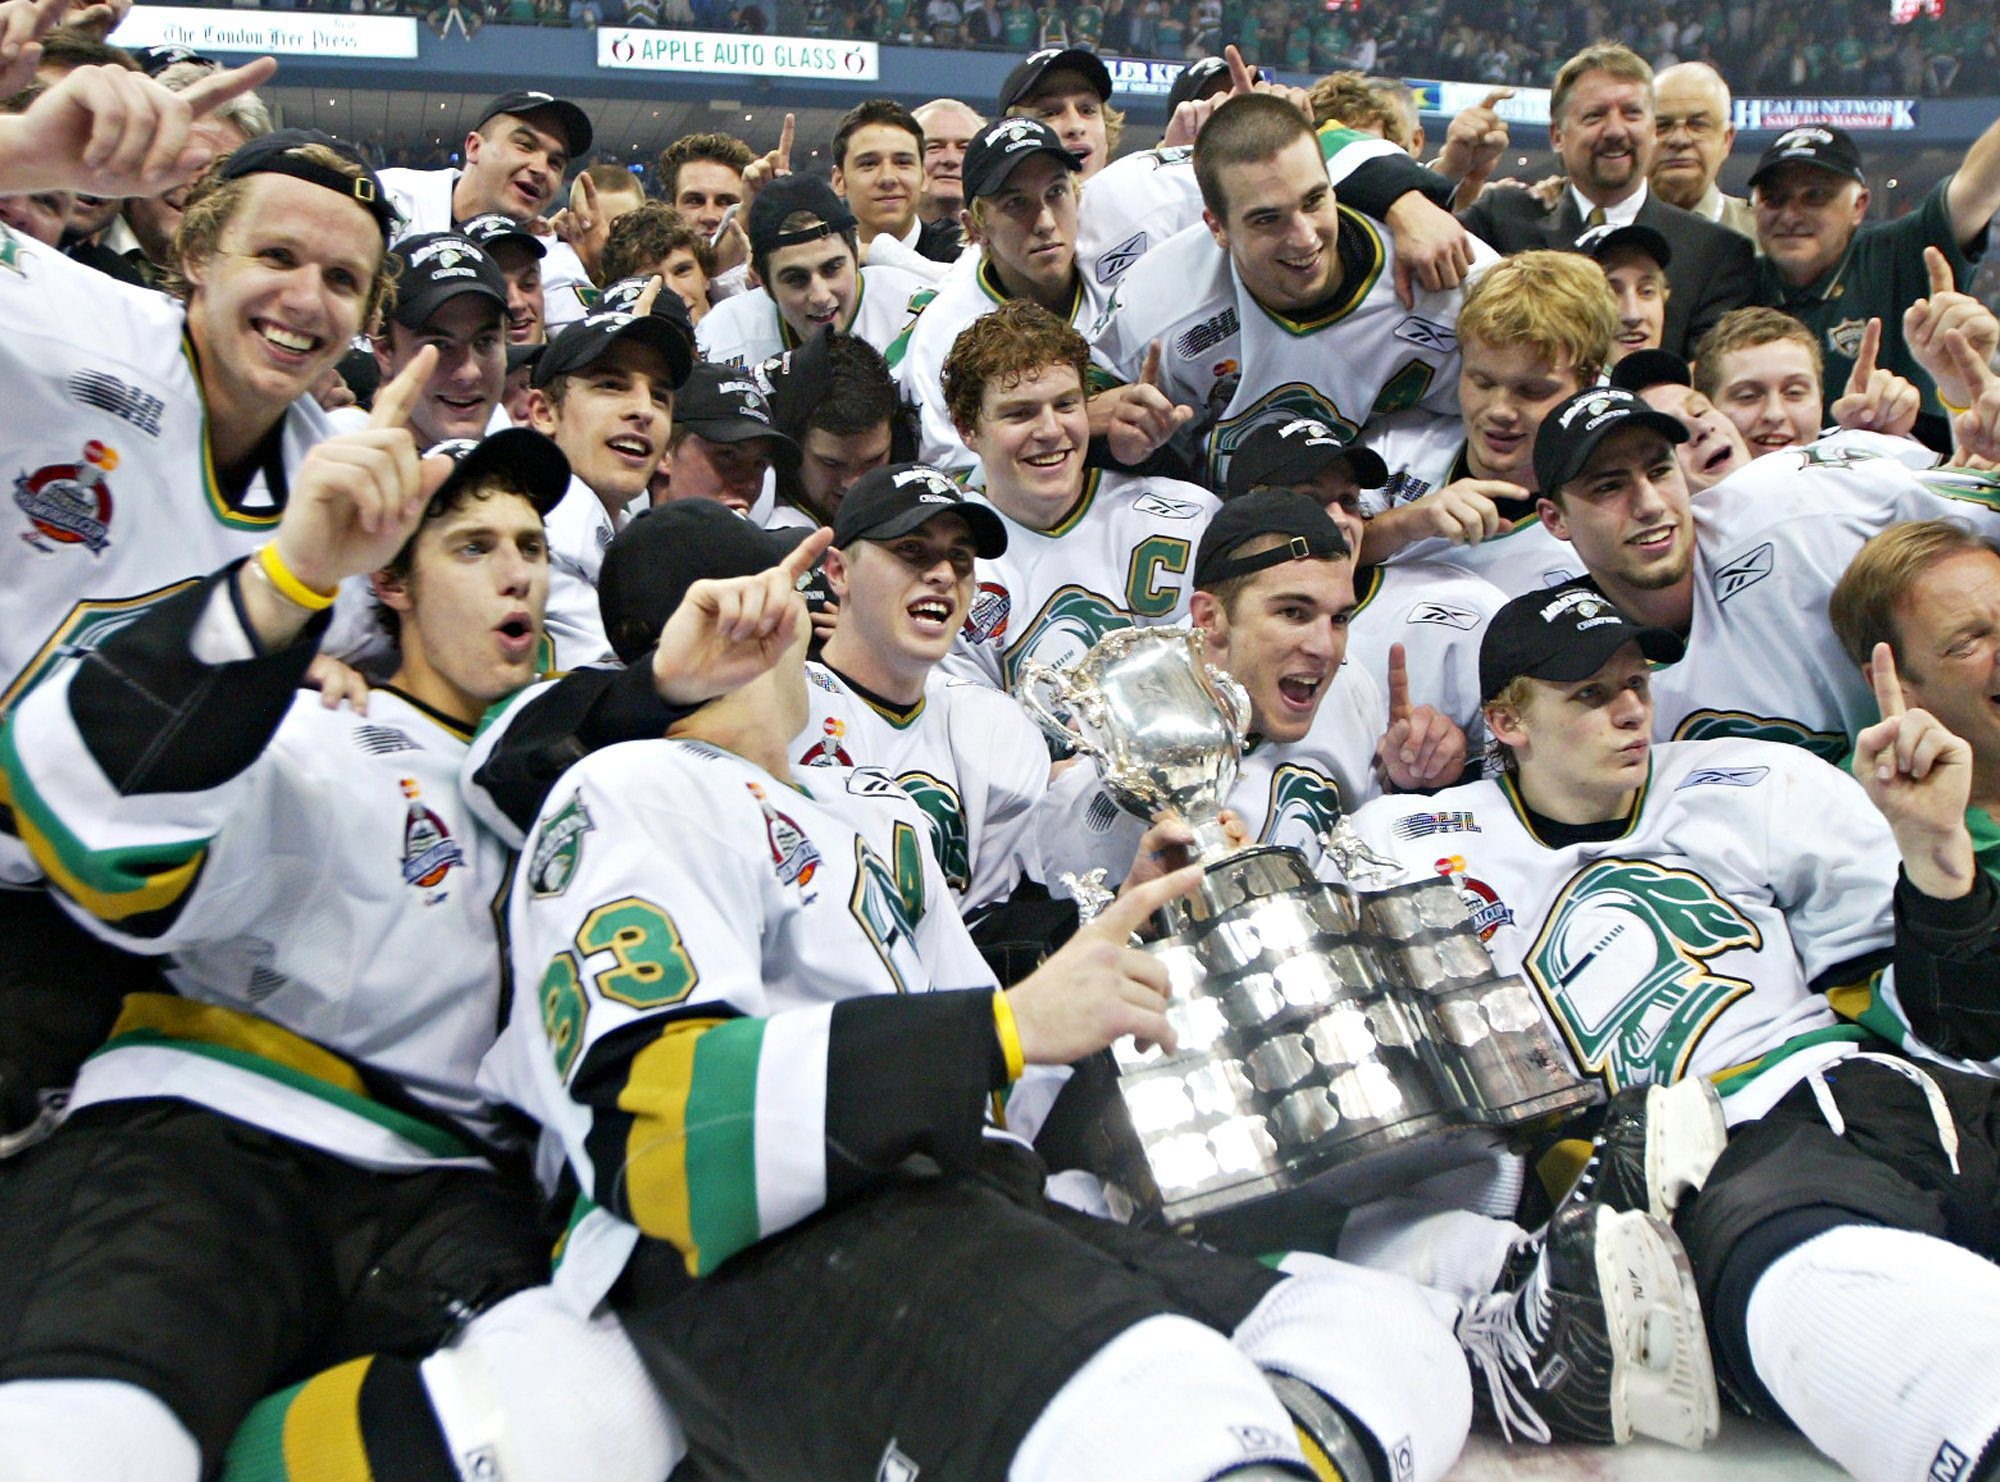 London Knights: Back in time – Shutting down Sidney Crosby